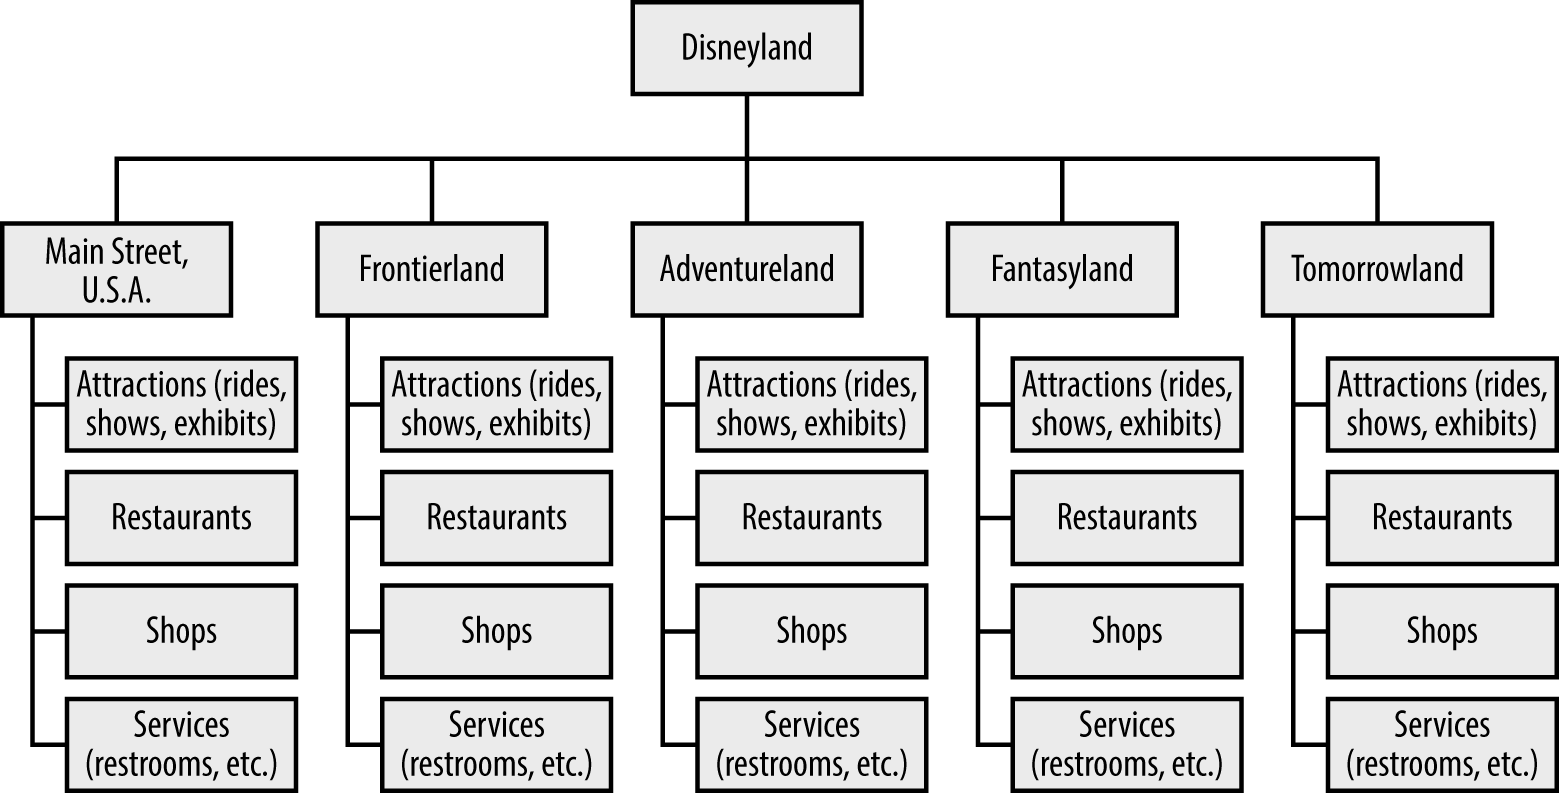 The organizational structure of Disneyland made a new, unfamiliar concept—the theme park—easily understandable to mid-1950s Americans by appealing to their emotions and fantasies